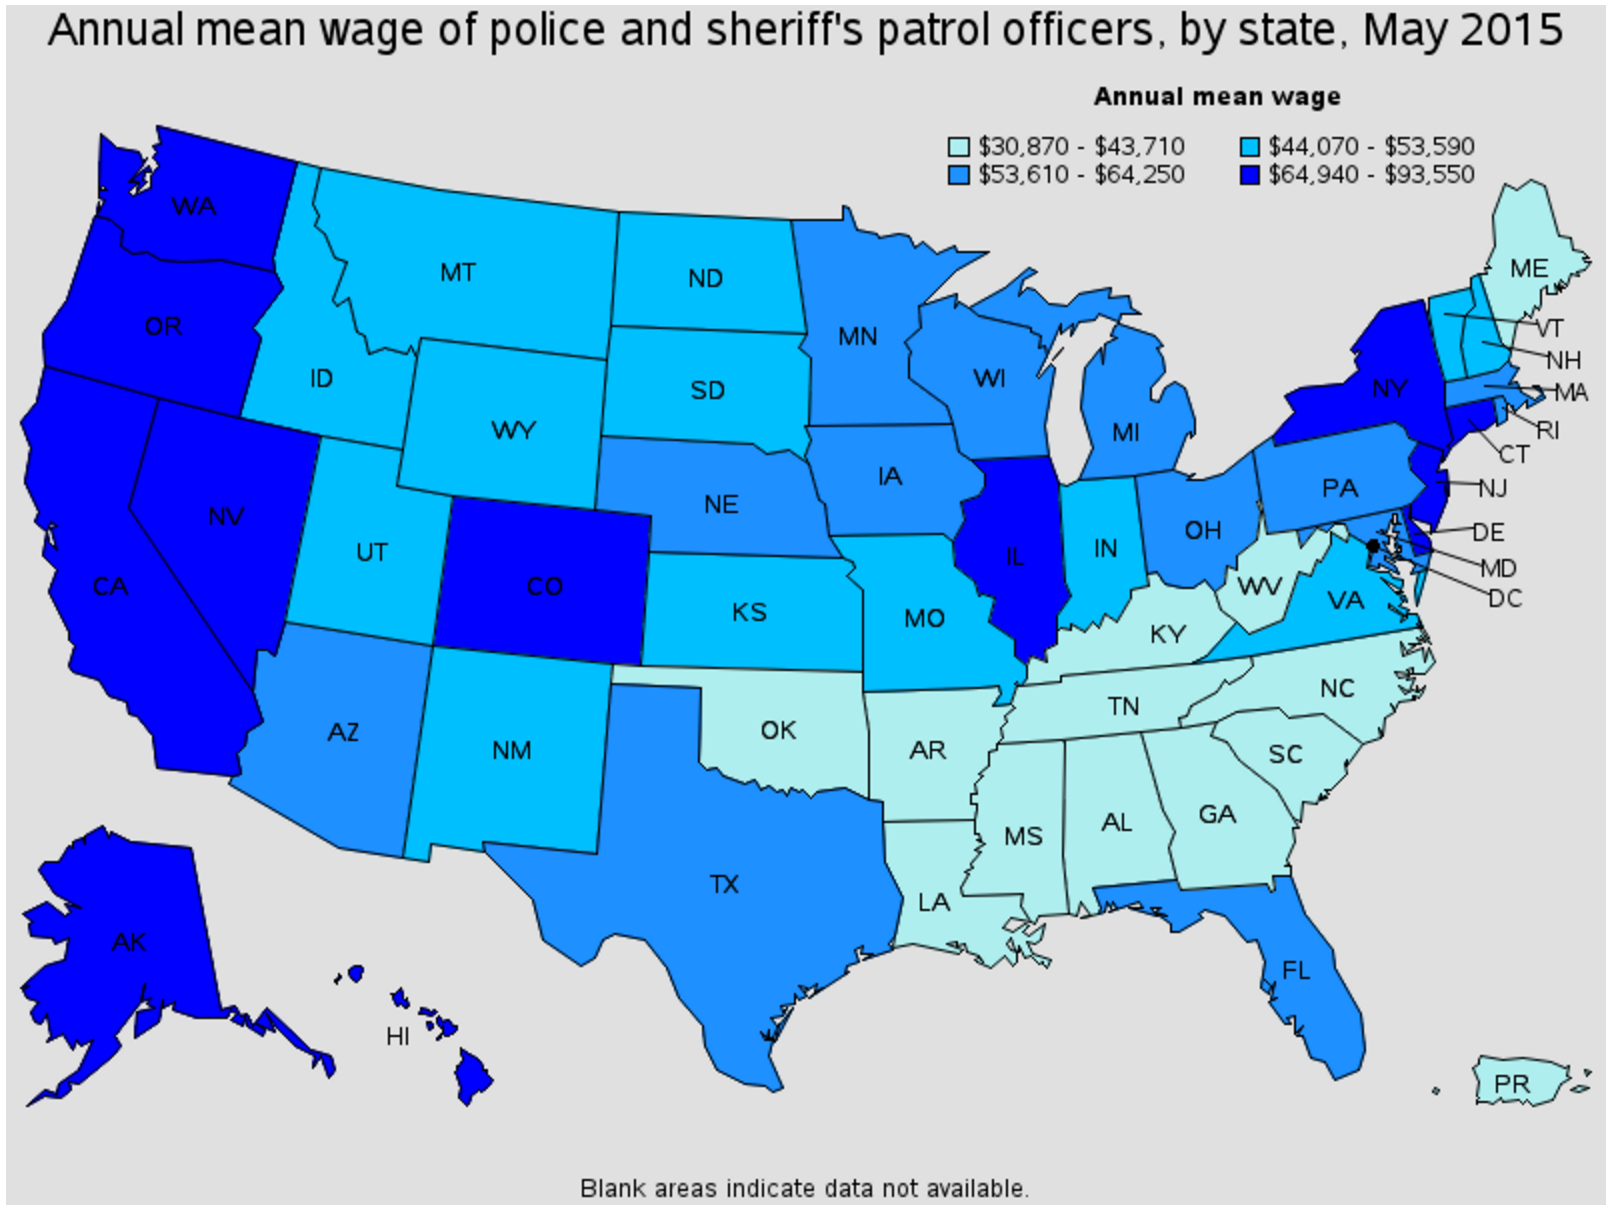 Rainsville police officer average salary by state